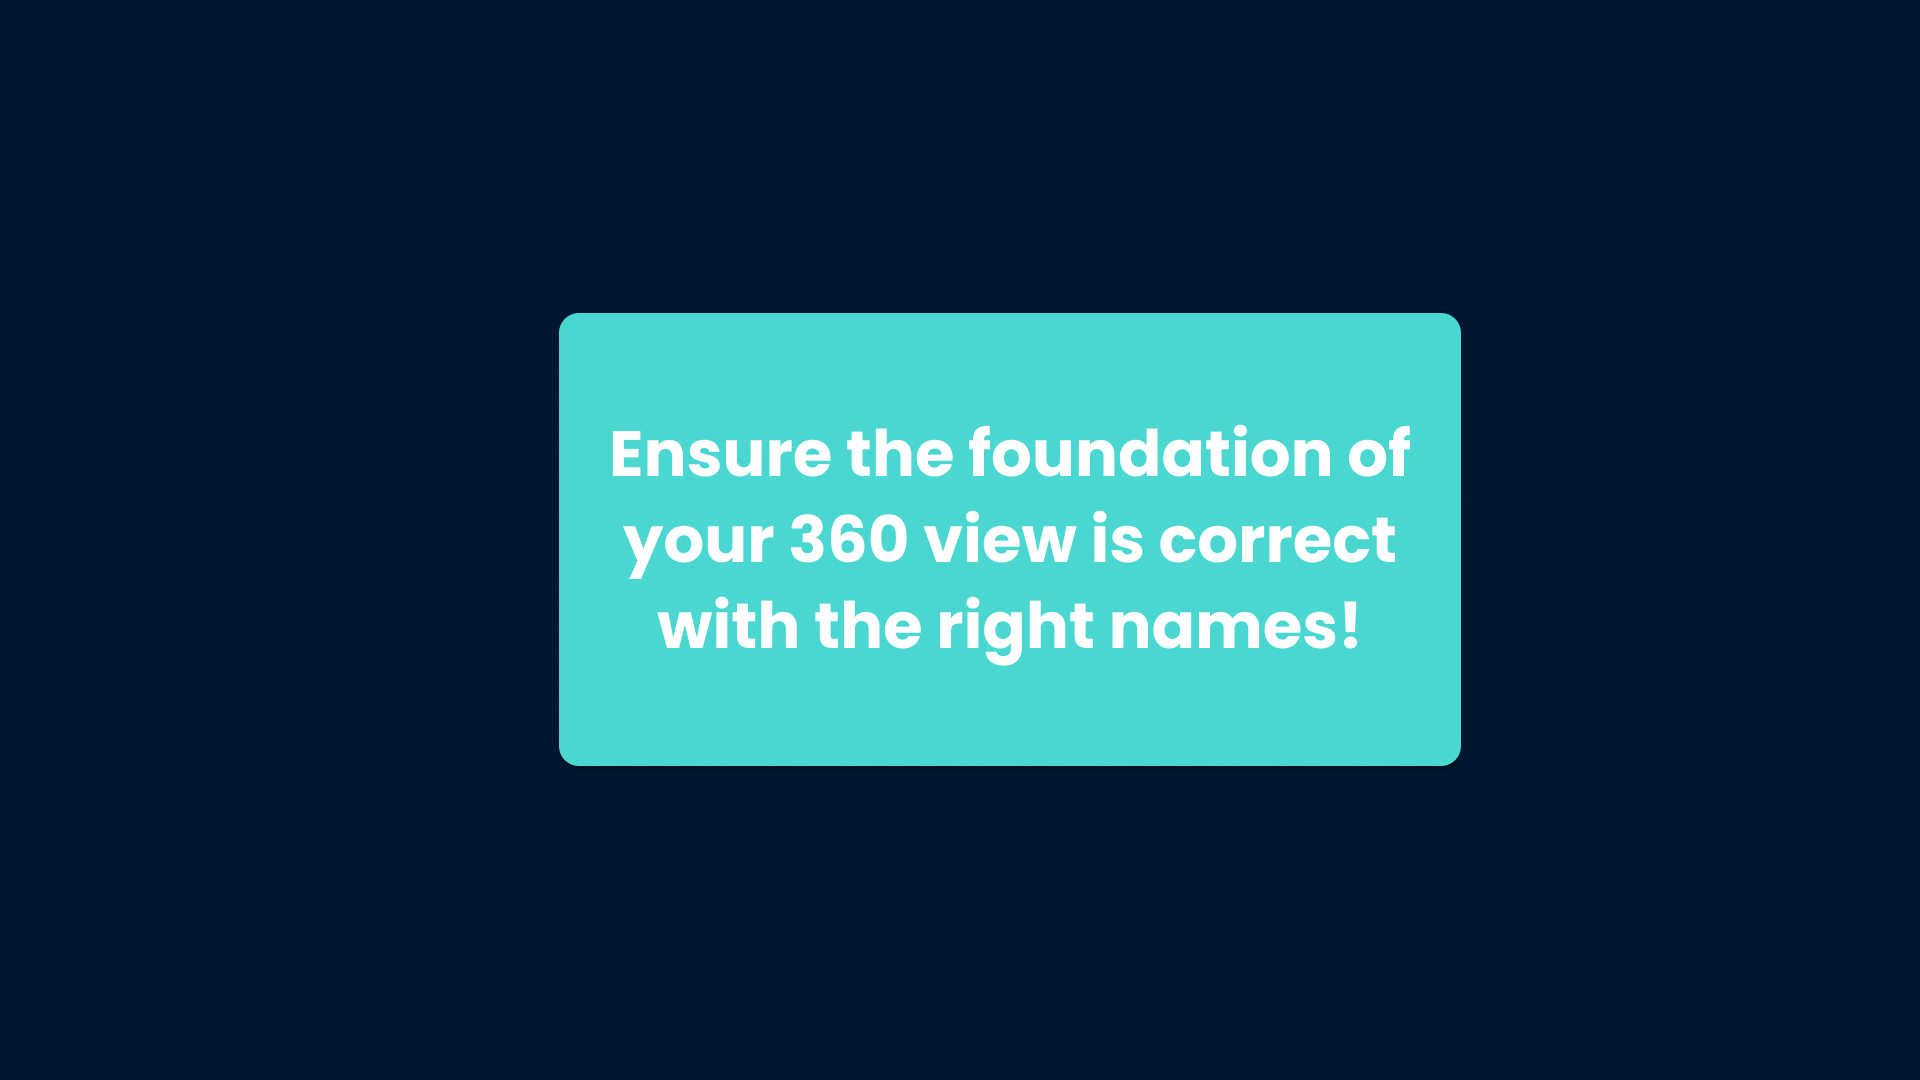 Ensure you have the correct 360 view of your customers starting with their names!